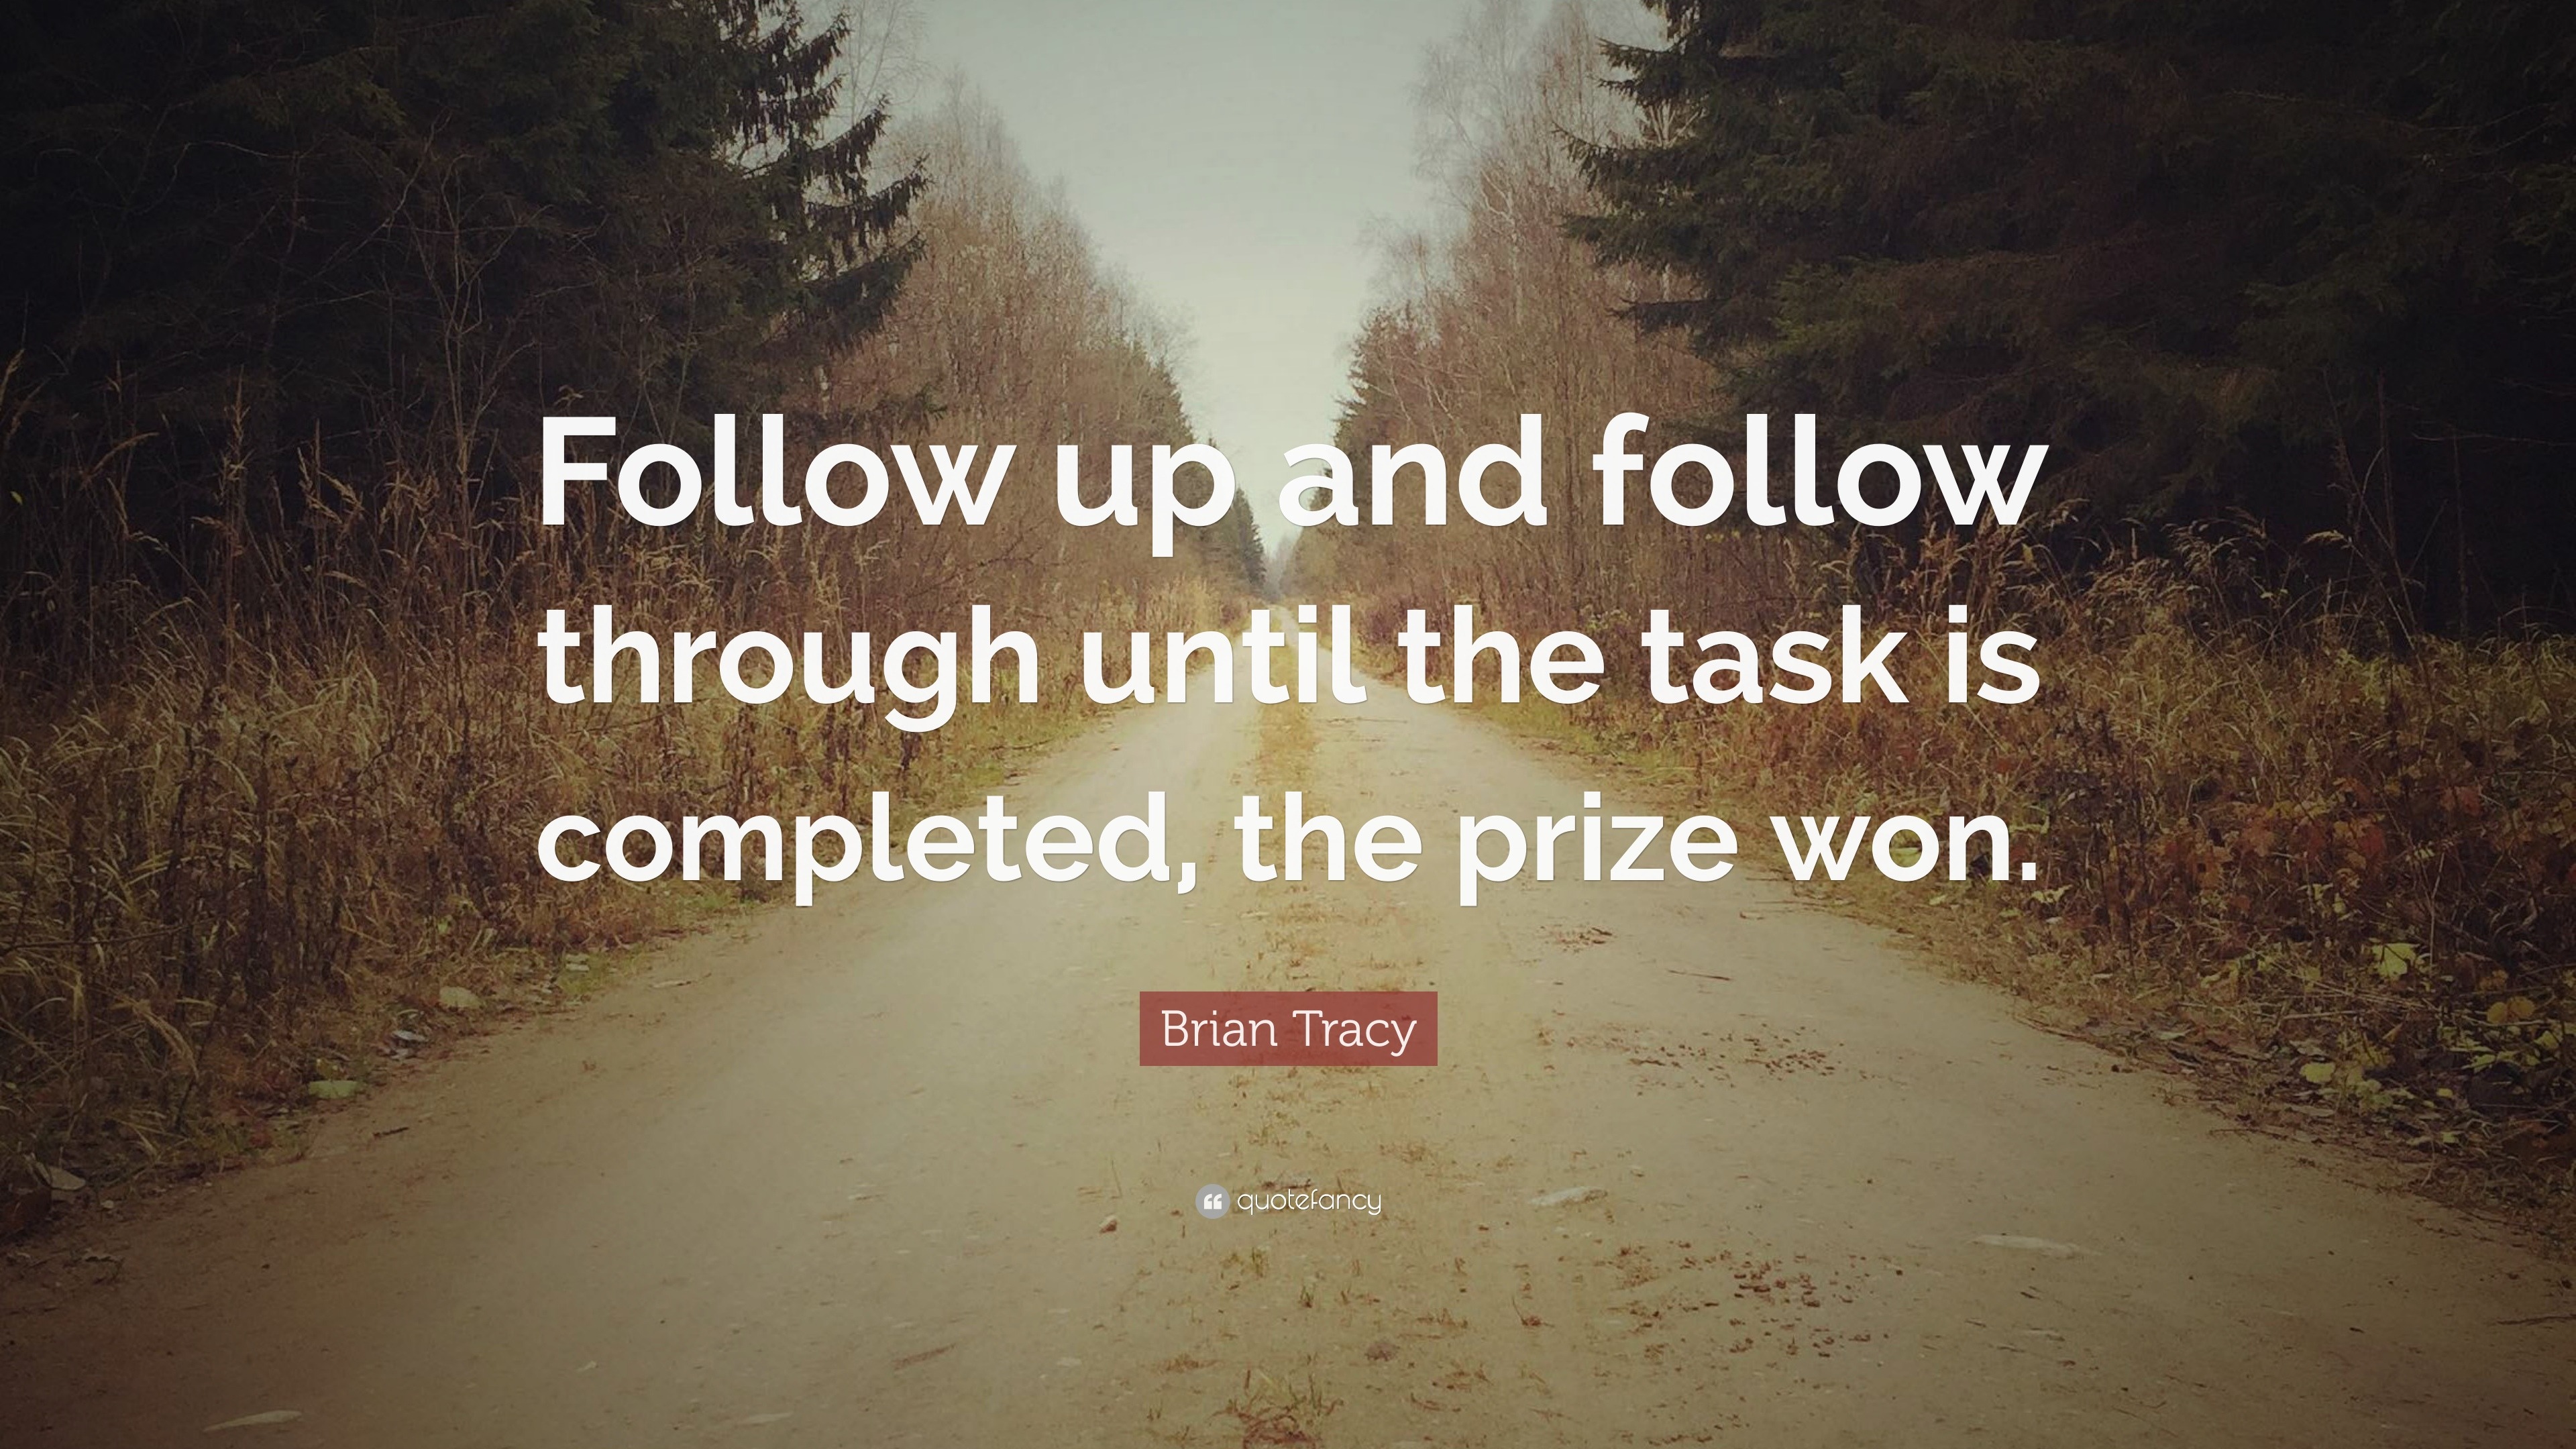 Brian Tracy Quote “follow Up And Follow Through Until The Task Is